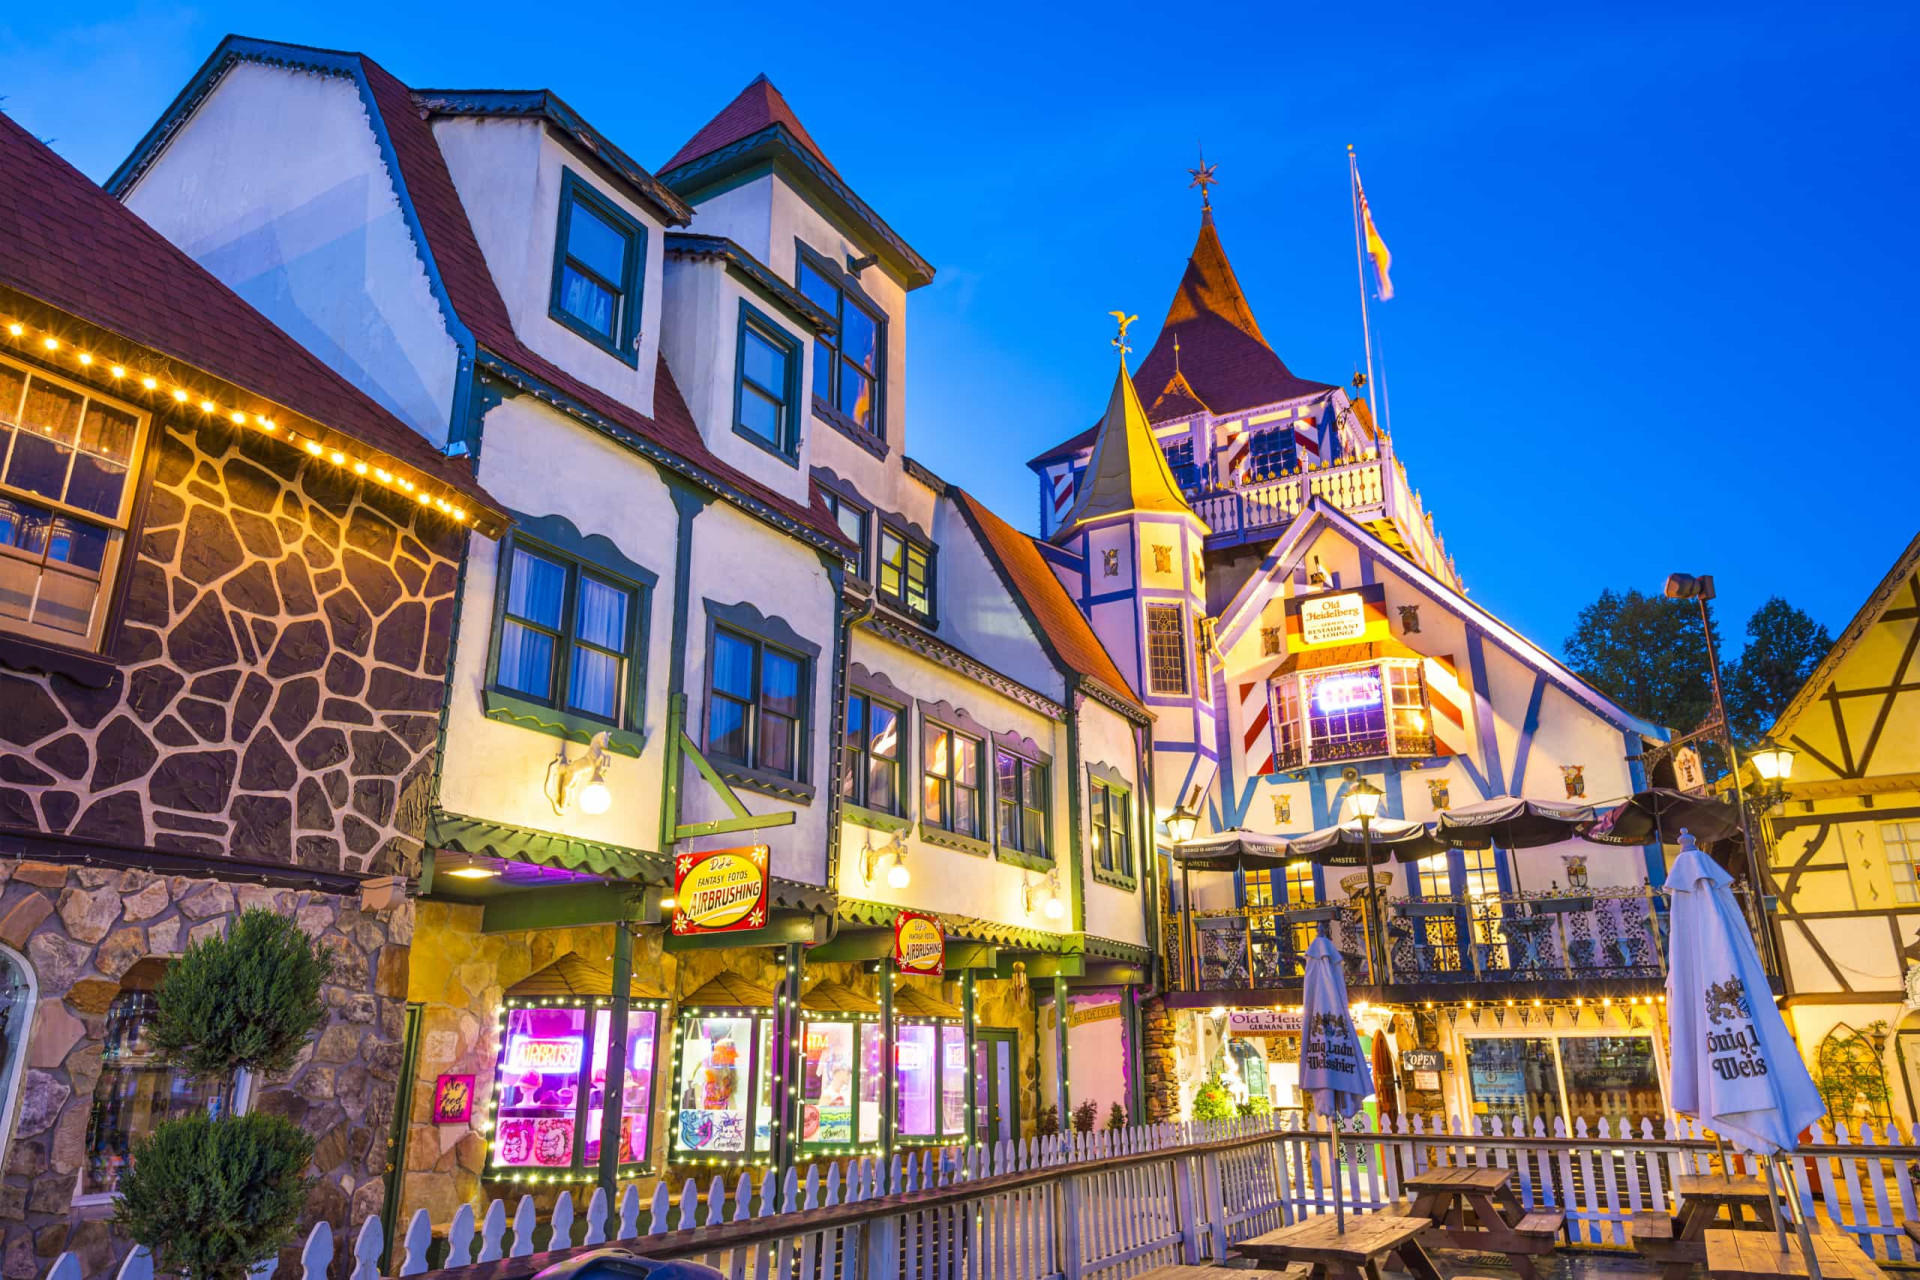 <p>A Bavarian village in the middle of Georgia? Believe it or not, you'll find it in Helen. The intricately-recreated German village lies on the banks of the Chattahoochee River in White County, and attracts holidaying families with its German sweets and other foodie treats.</p><p><a href="https://www.msn.com/en-us/community/channel/vid-7xx8mnucu55yw63we9va2gwr7uihbxwc68fxqp25x6tg4ftibpra?cvid=94631541bc0f4f89bfd59158d696ad7e">Follow us and access great exclusive content every day</a></p>